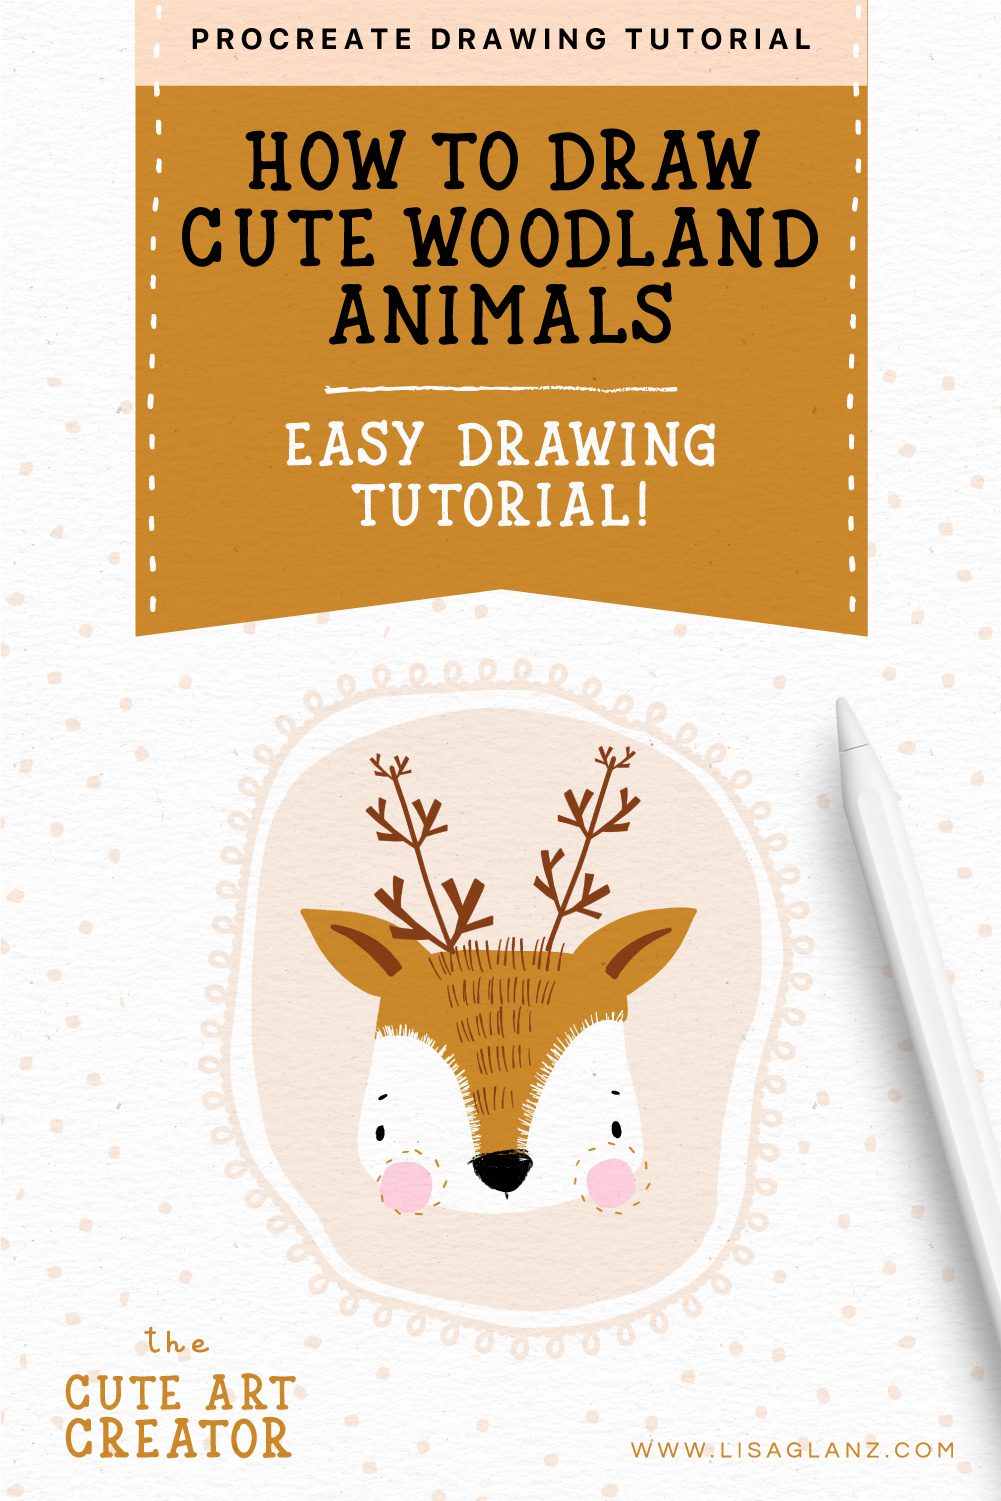 How to draw cute woodland animals – an easy drawing tutorial